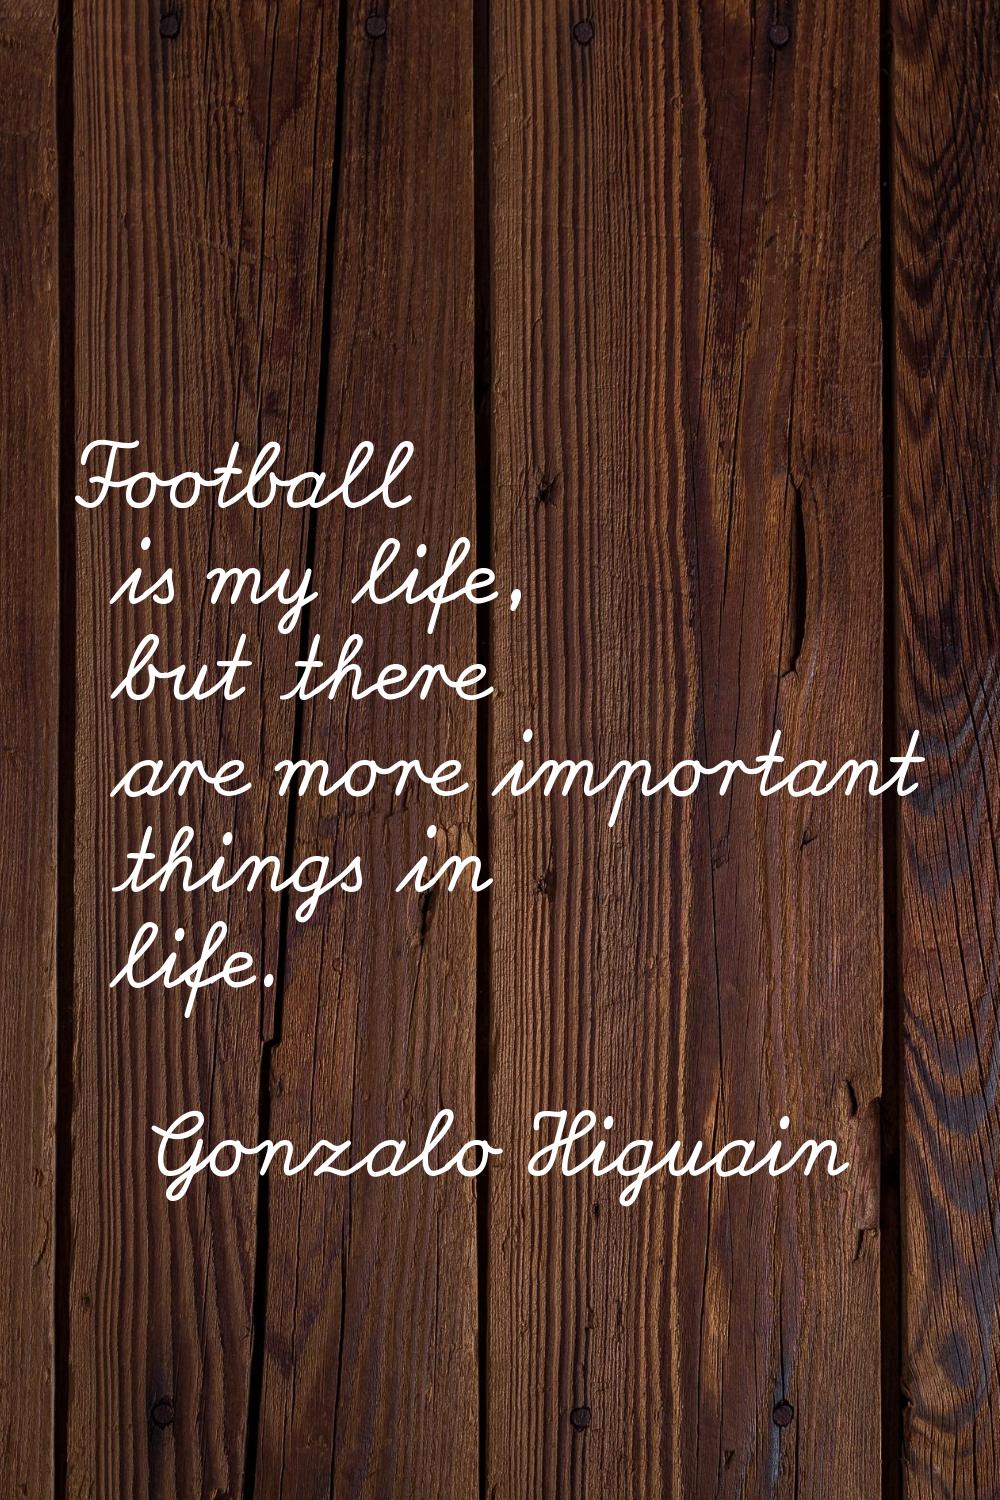 Football is my life, but there are more important things in life.